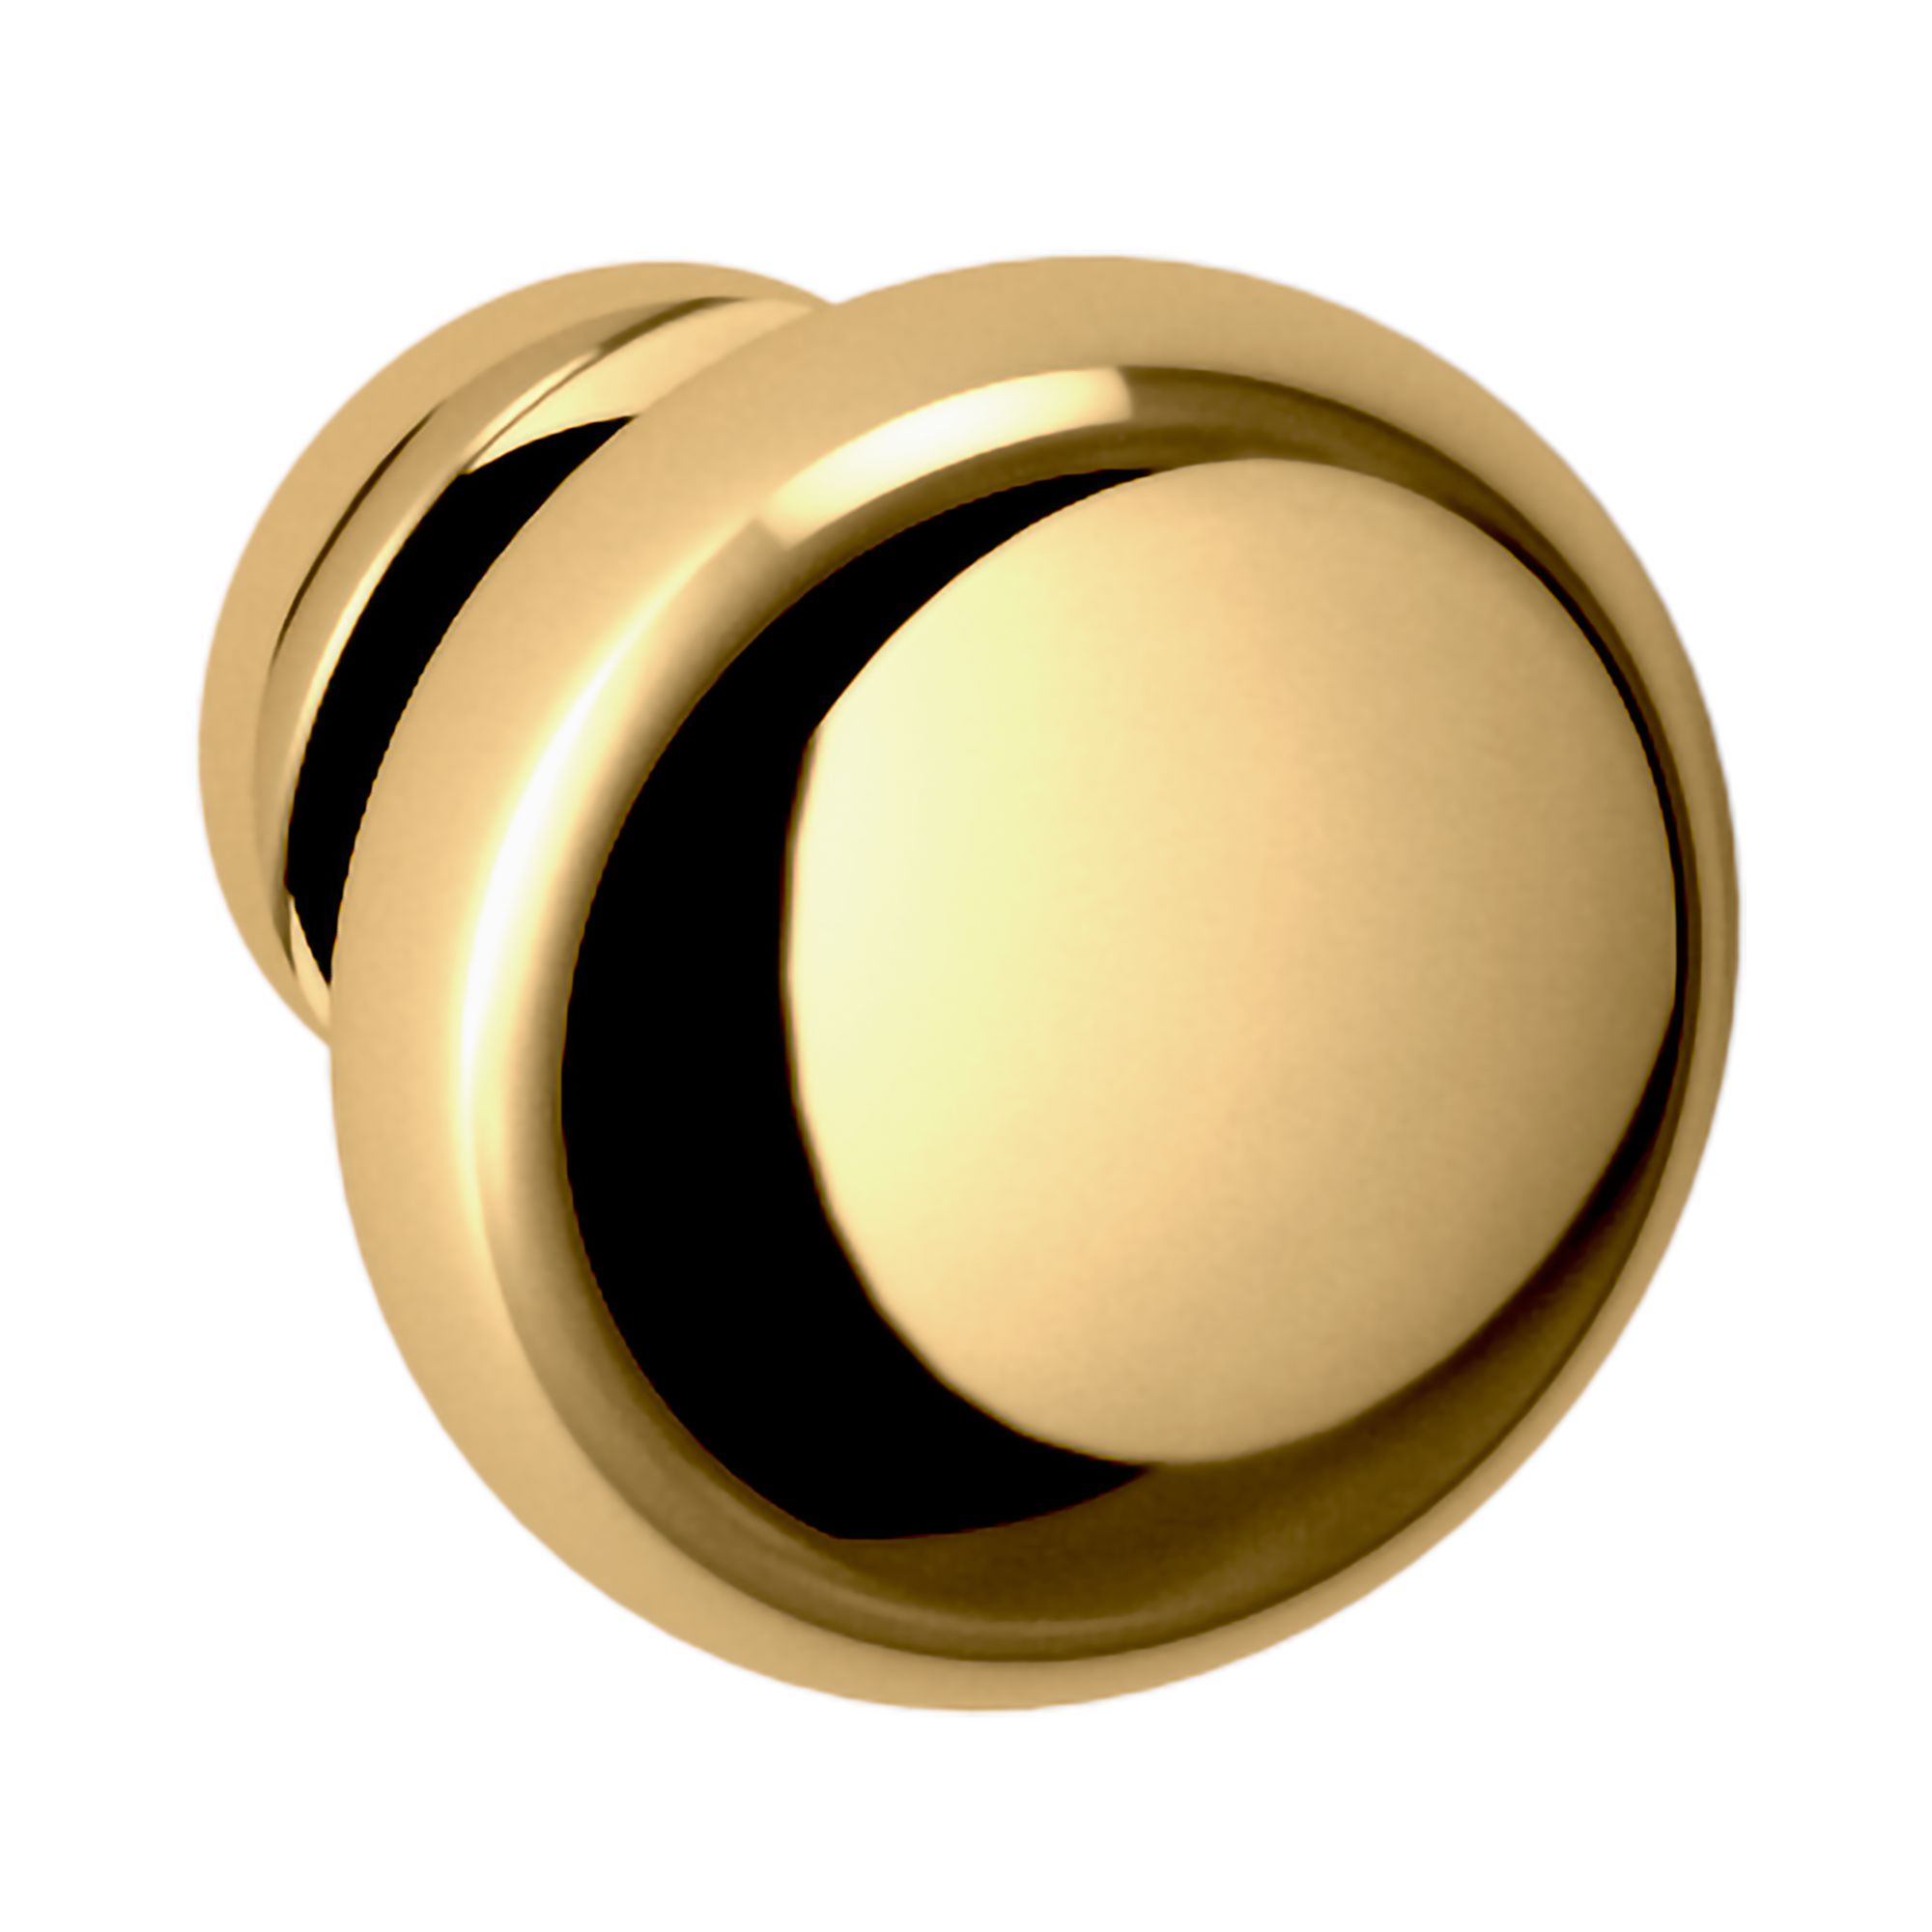 Raised Oval Door Knobs - Polished Brass